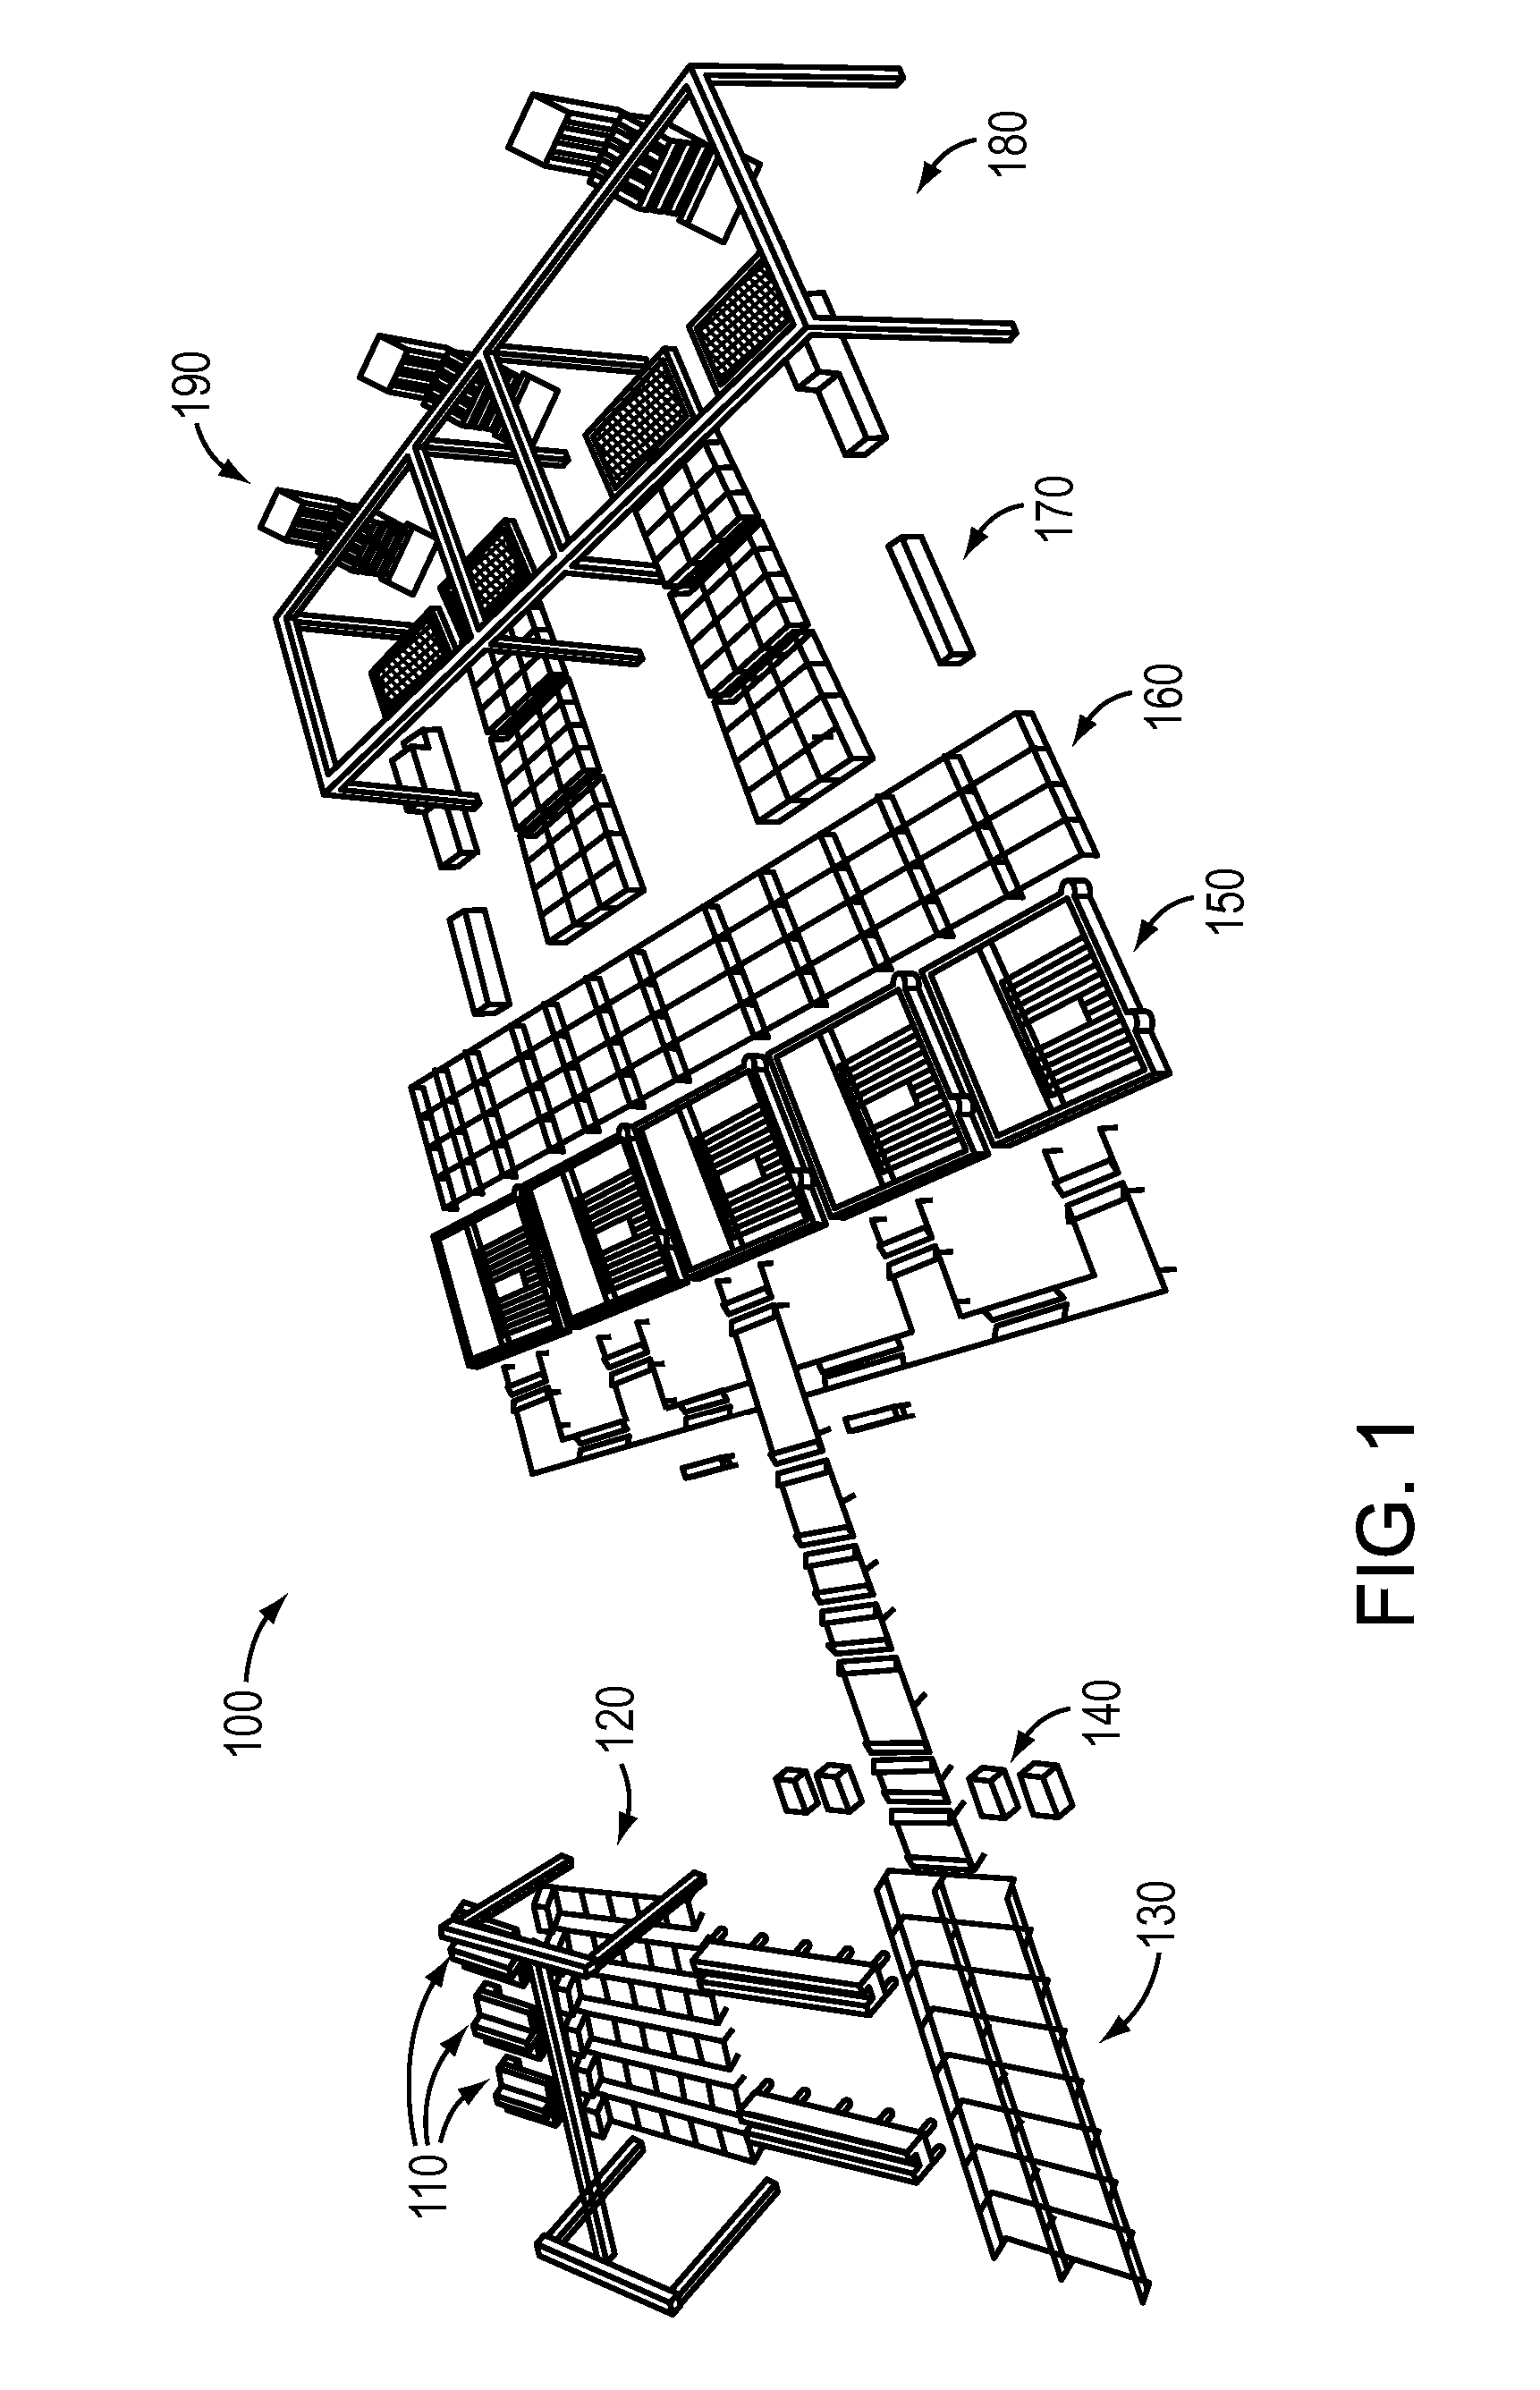 Tools and methods for designing a structure using prefabricated panels